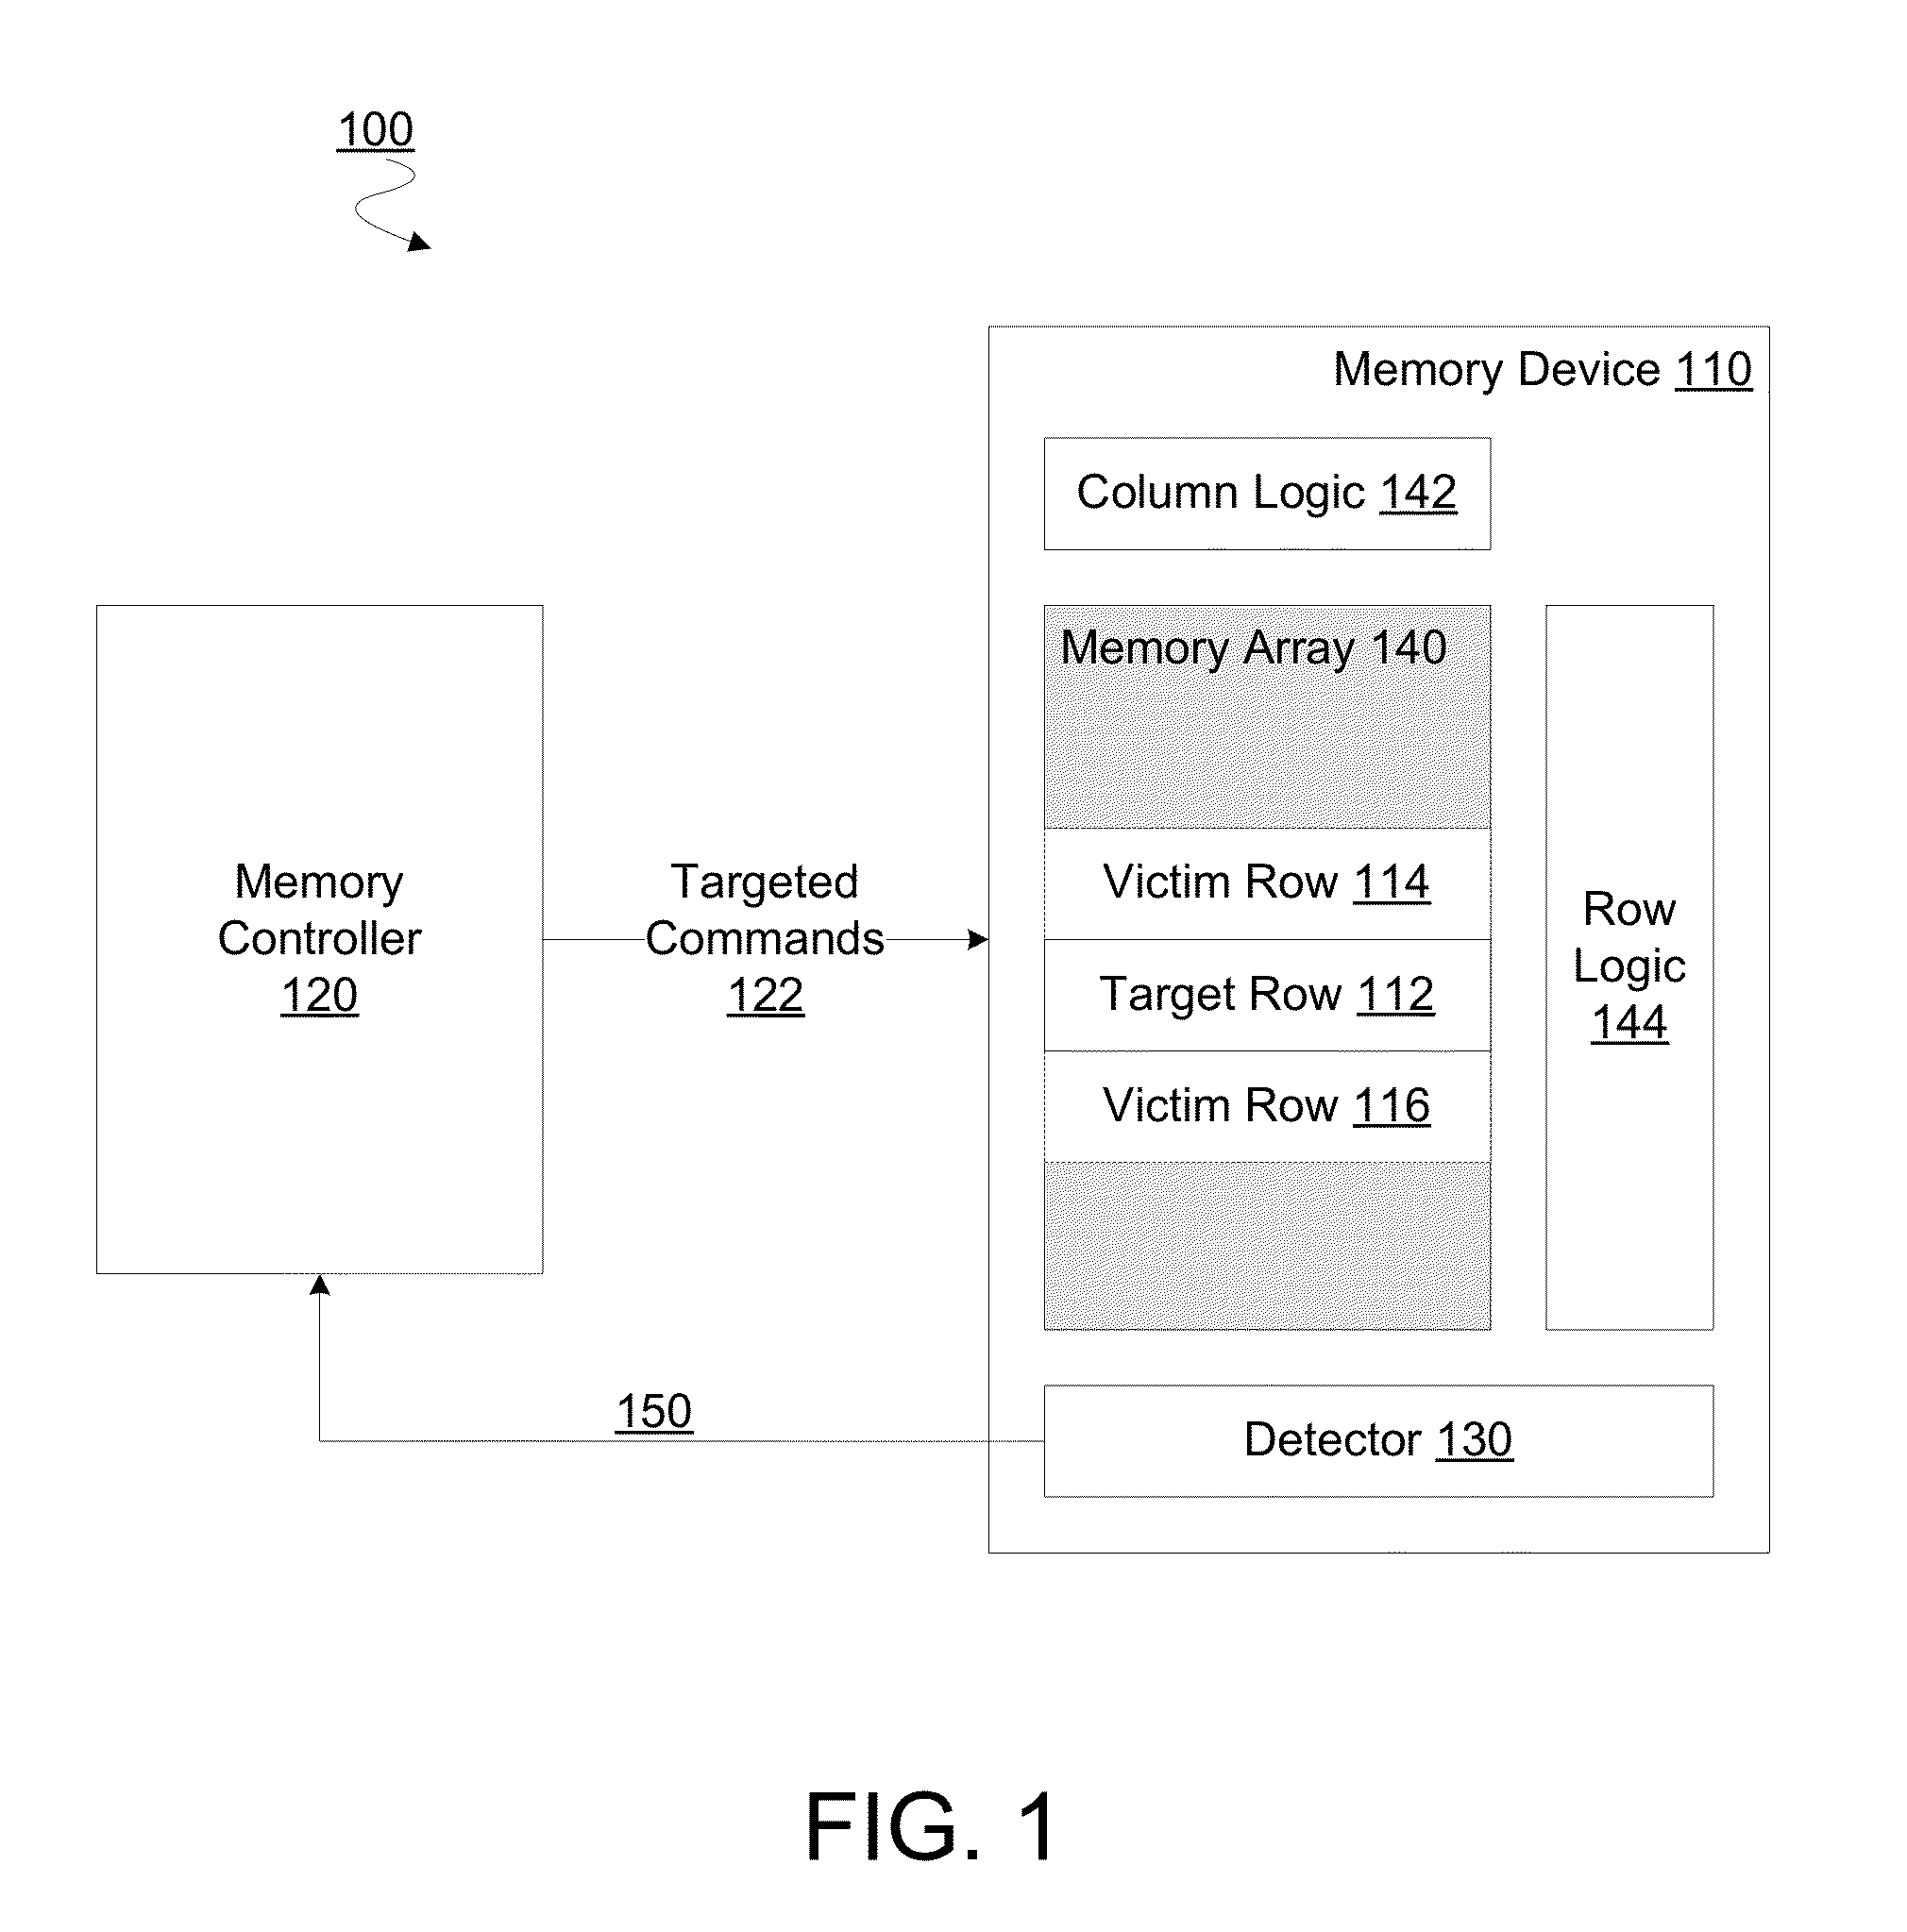 Method, apparatus and system for determining a count of accesses to a row of memory